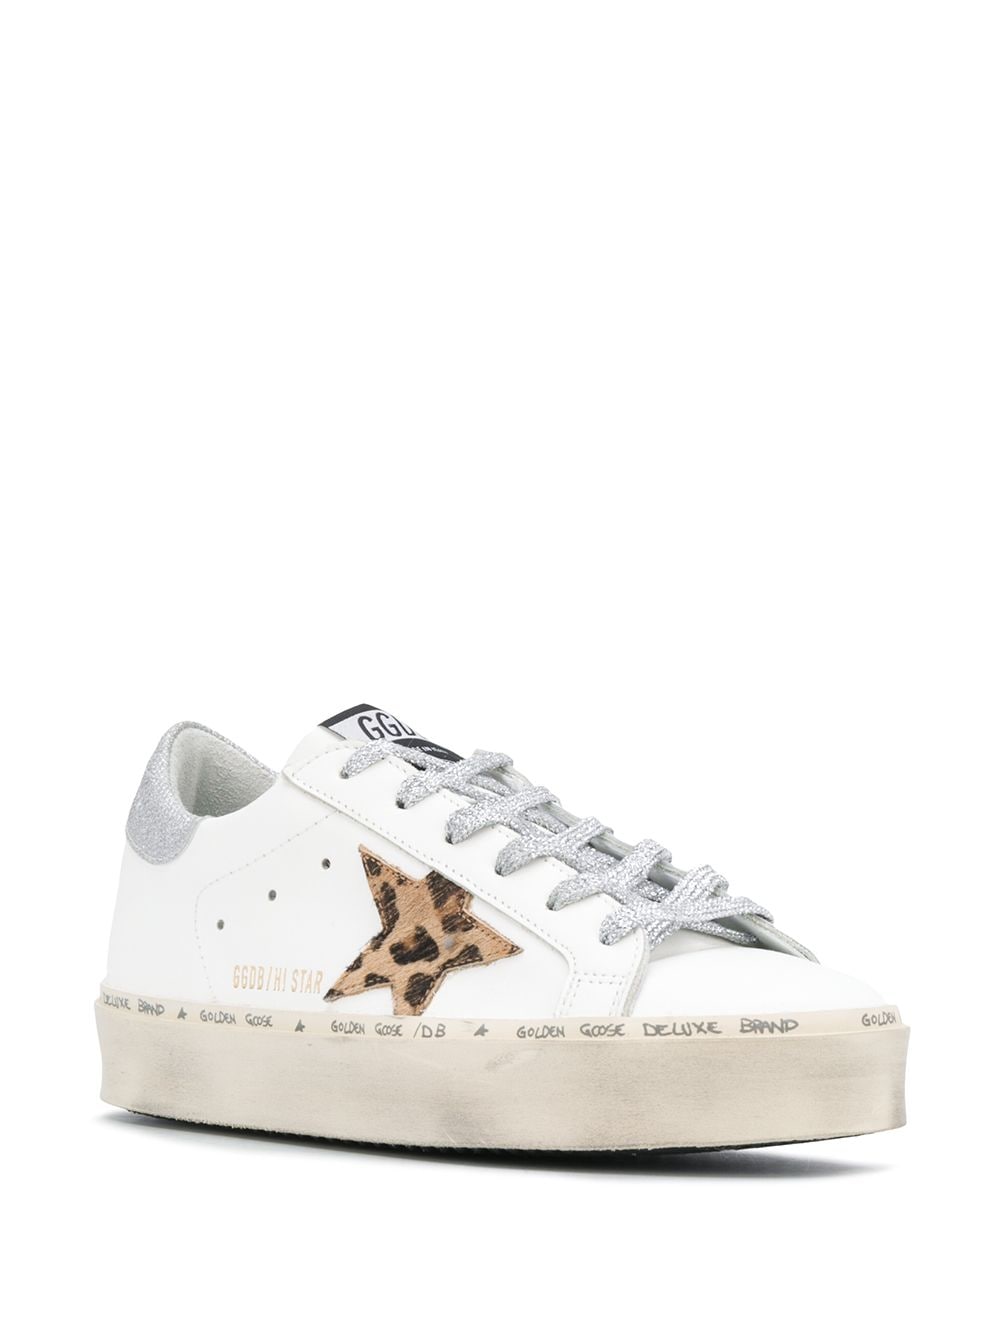 Shop Golden Goose Hi Star sneakers with Express Delivery - FARFETCH